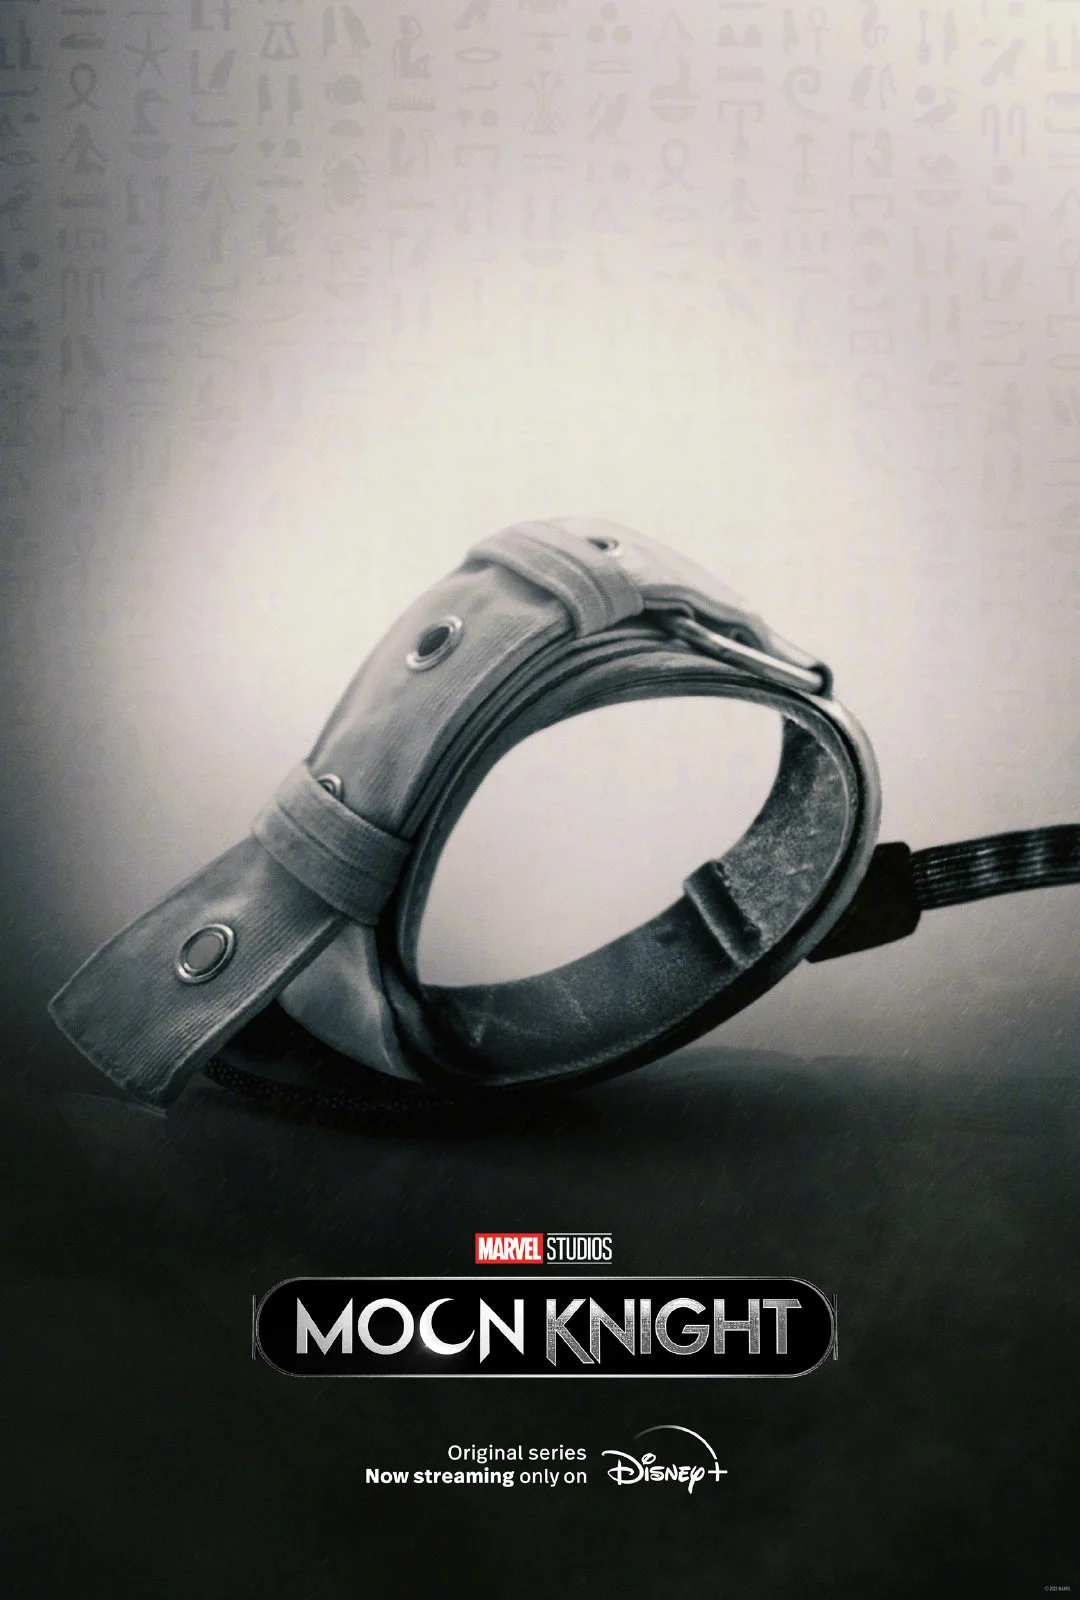 "Moon Knight" is about to air its final episode and released new posters